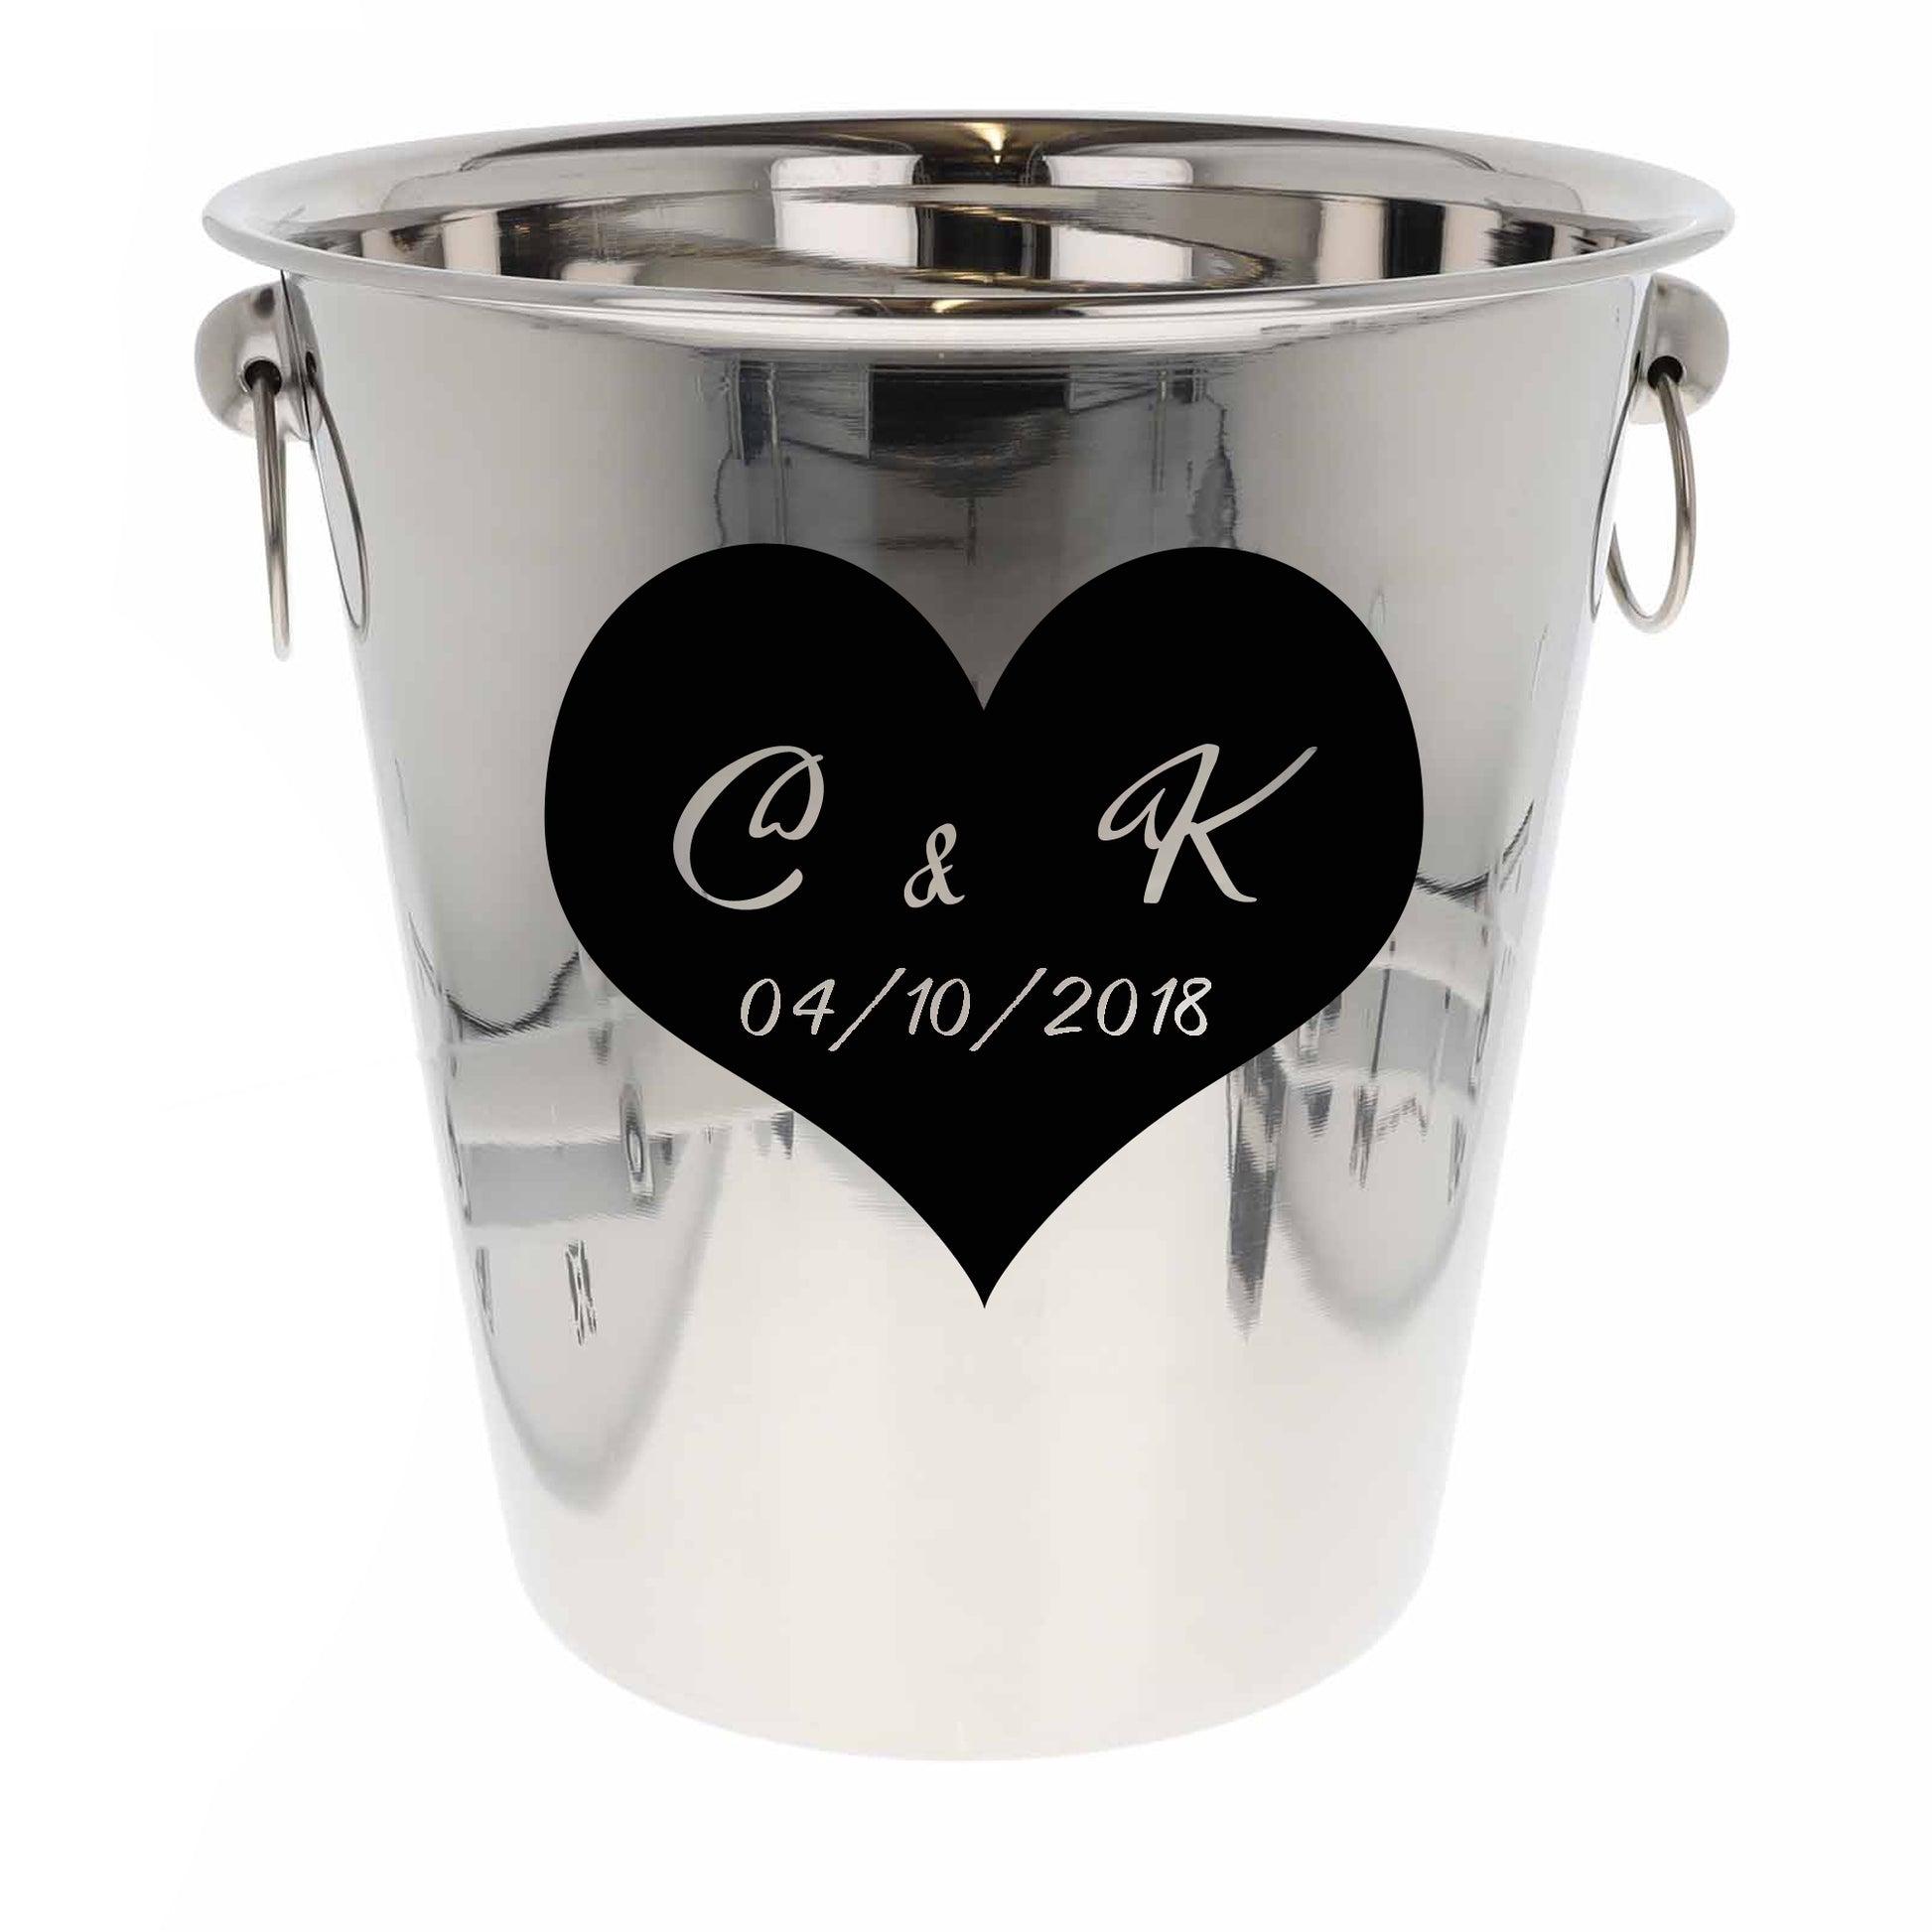 Personalised Heart Design Ice Bucket With Matching Champagne Glasses With Name and Date  - Always Looking Good -   